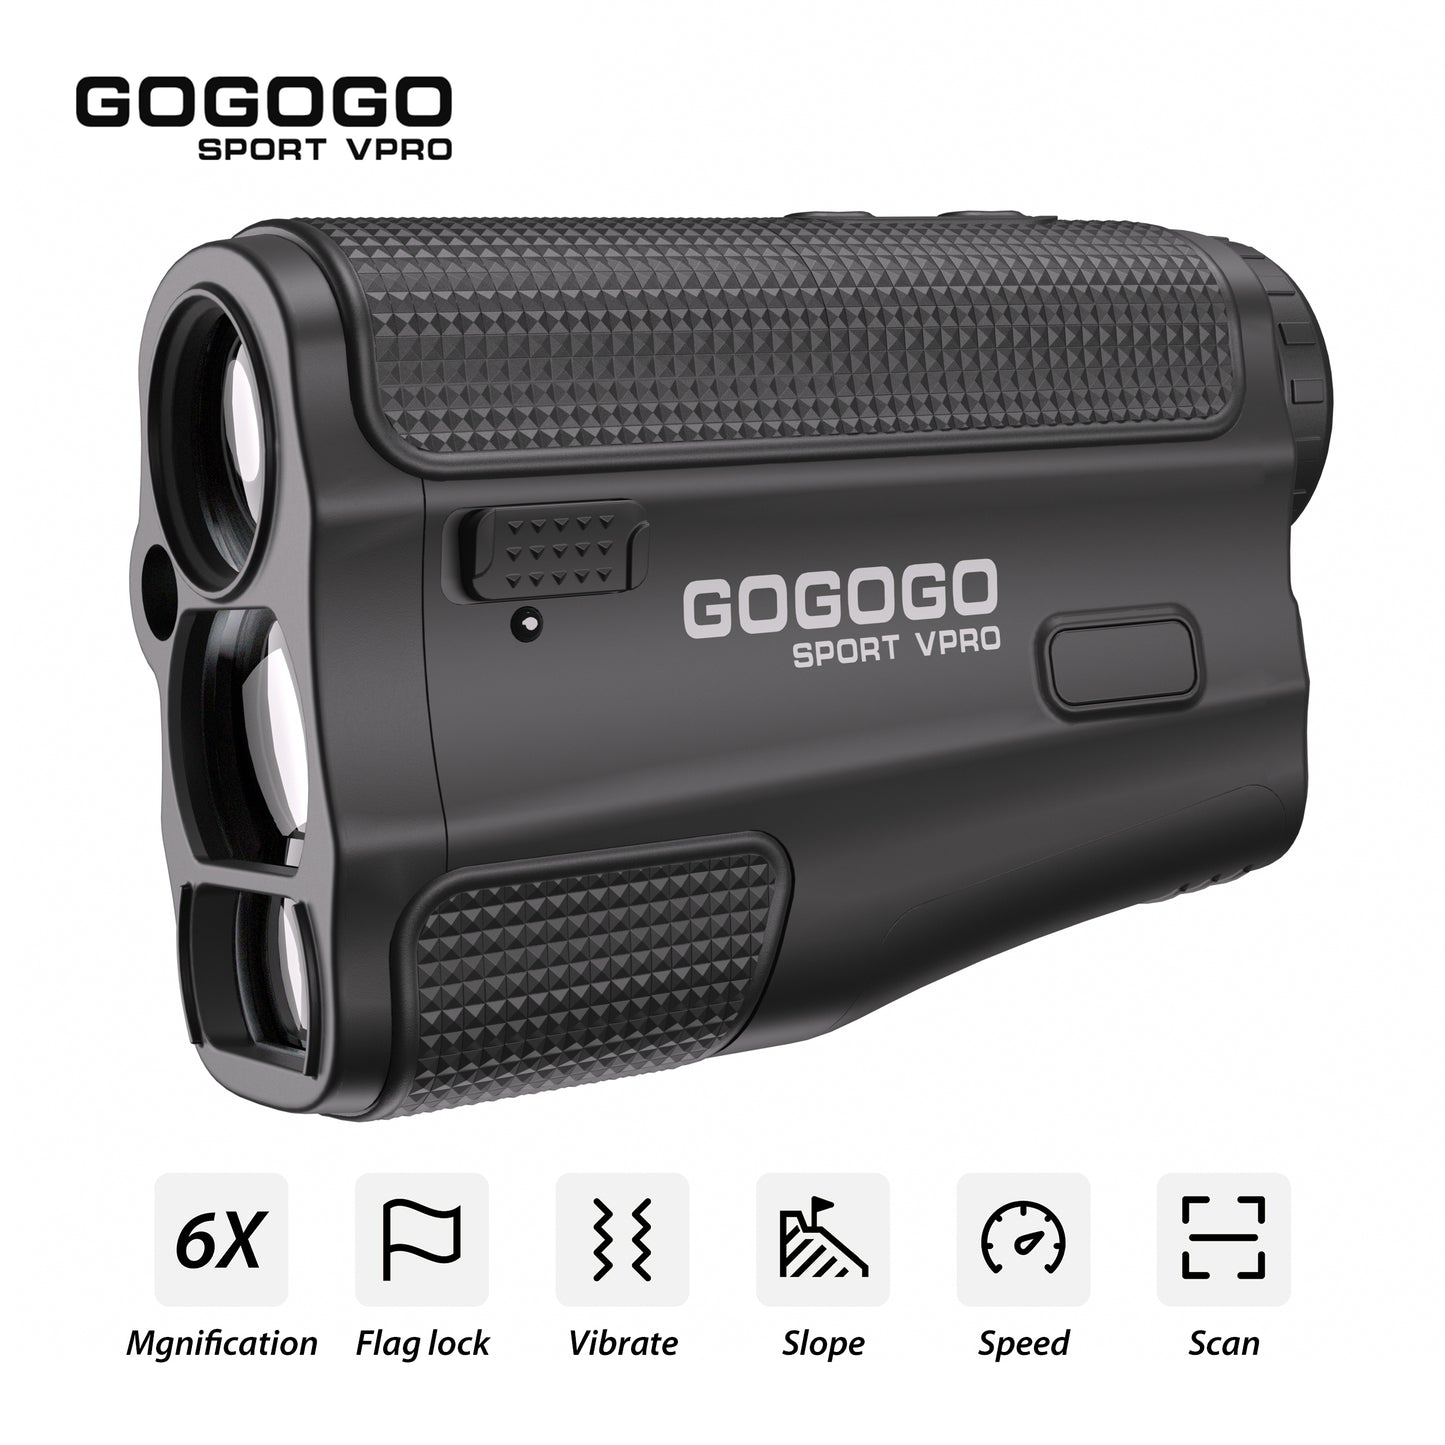 Gogogo Sport Vpro Golf Hunting Range Finder Gift Distance Measuring with High-Precision Flag Pole Locking Vibration Function | GS52  650Y